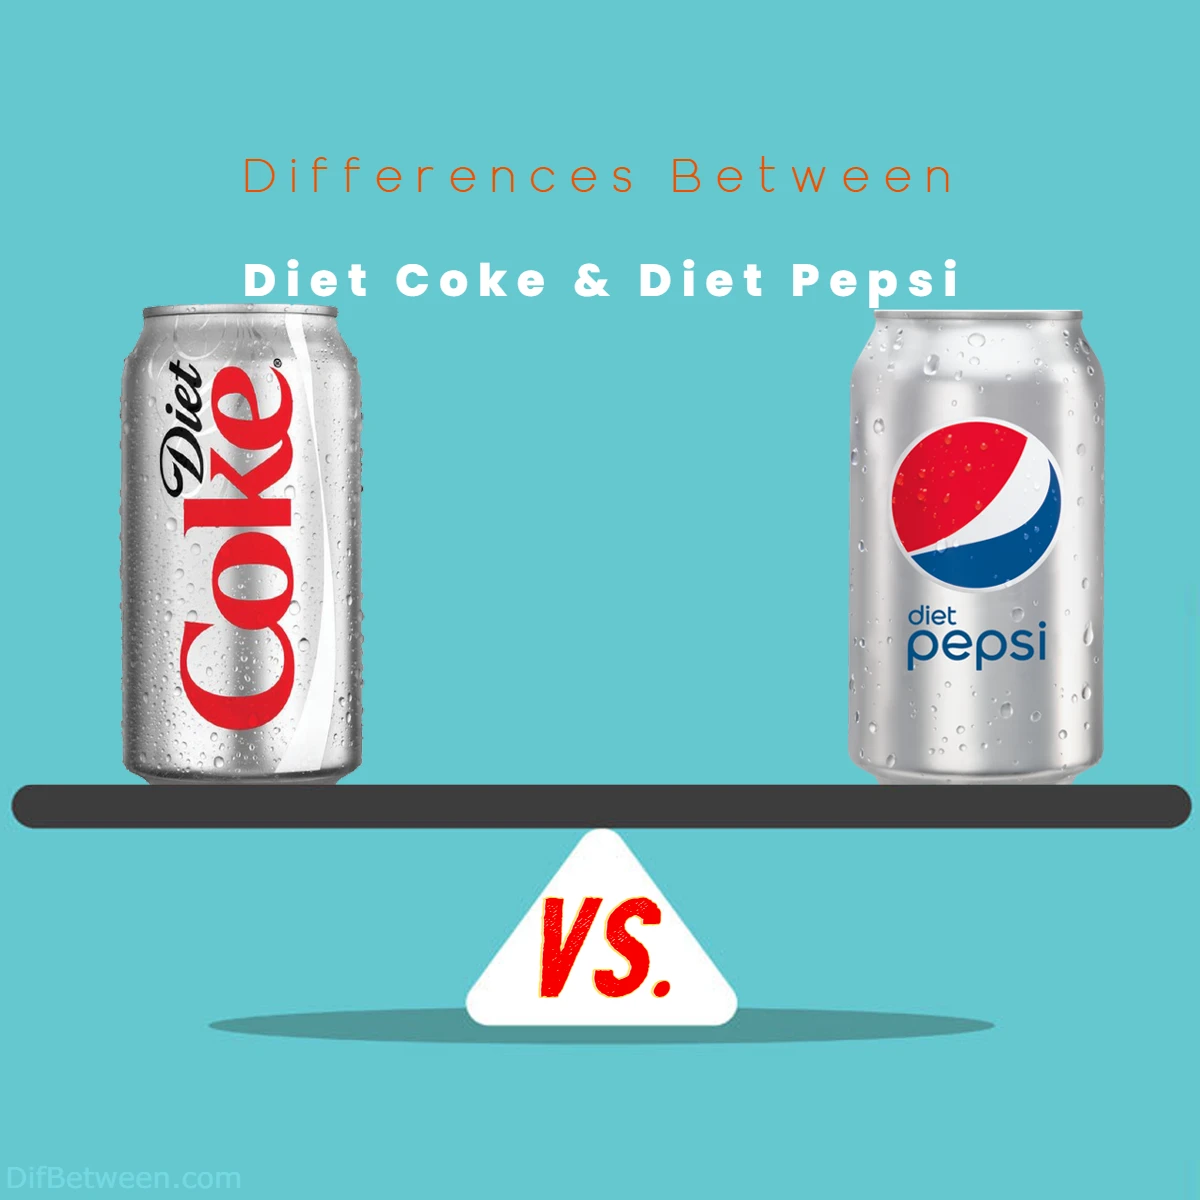 Differences Between Diet Pepsi and Diet Coke